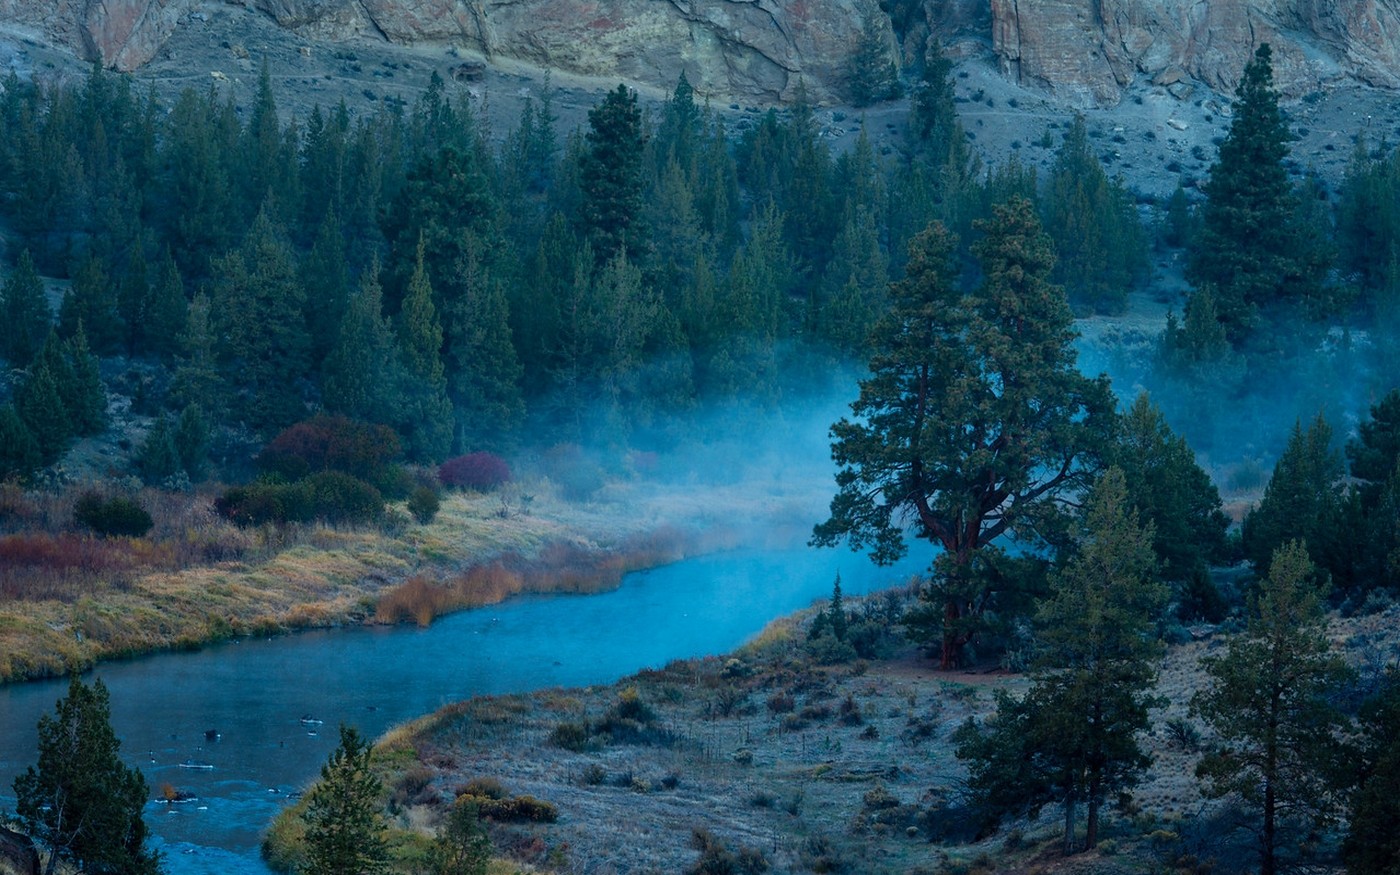 General 1400x875 mist river morning forest Oregon nature trees hills landscape turquoise water shrubs mountains grass blue USA